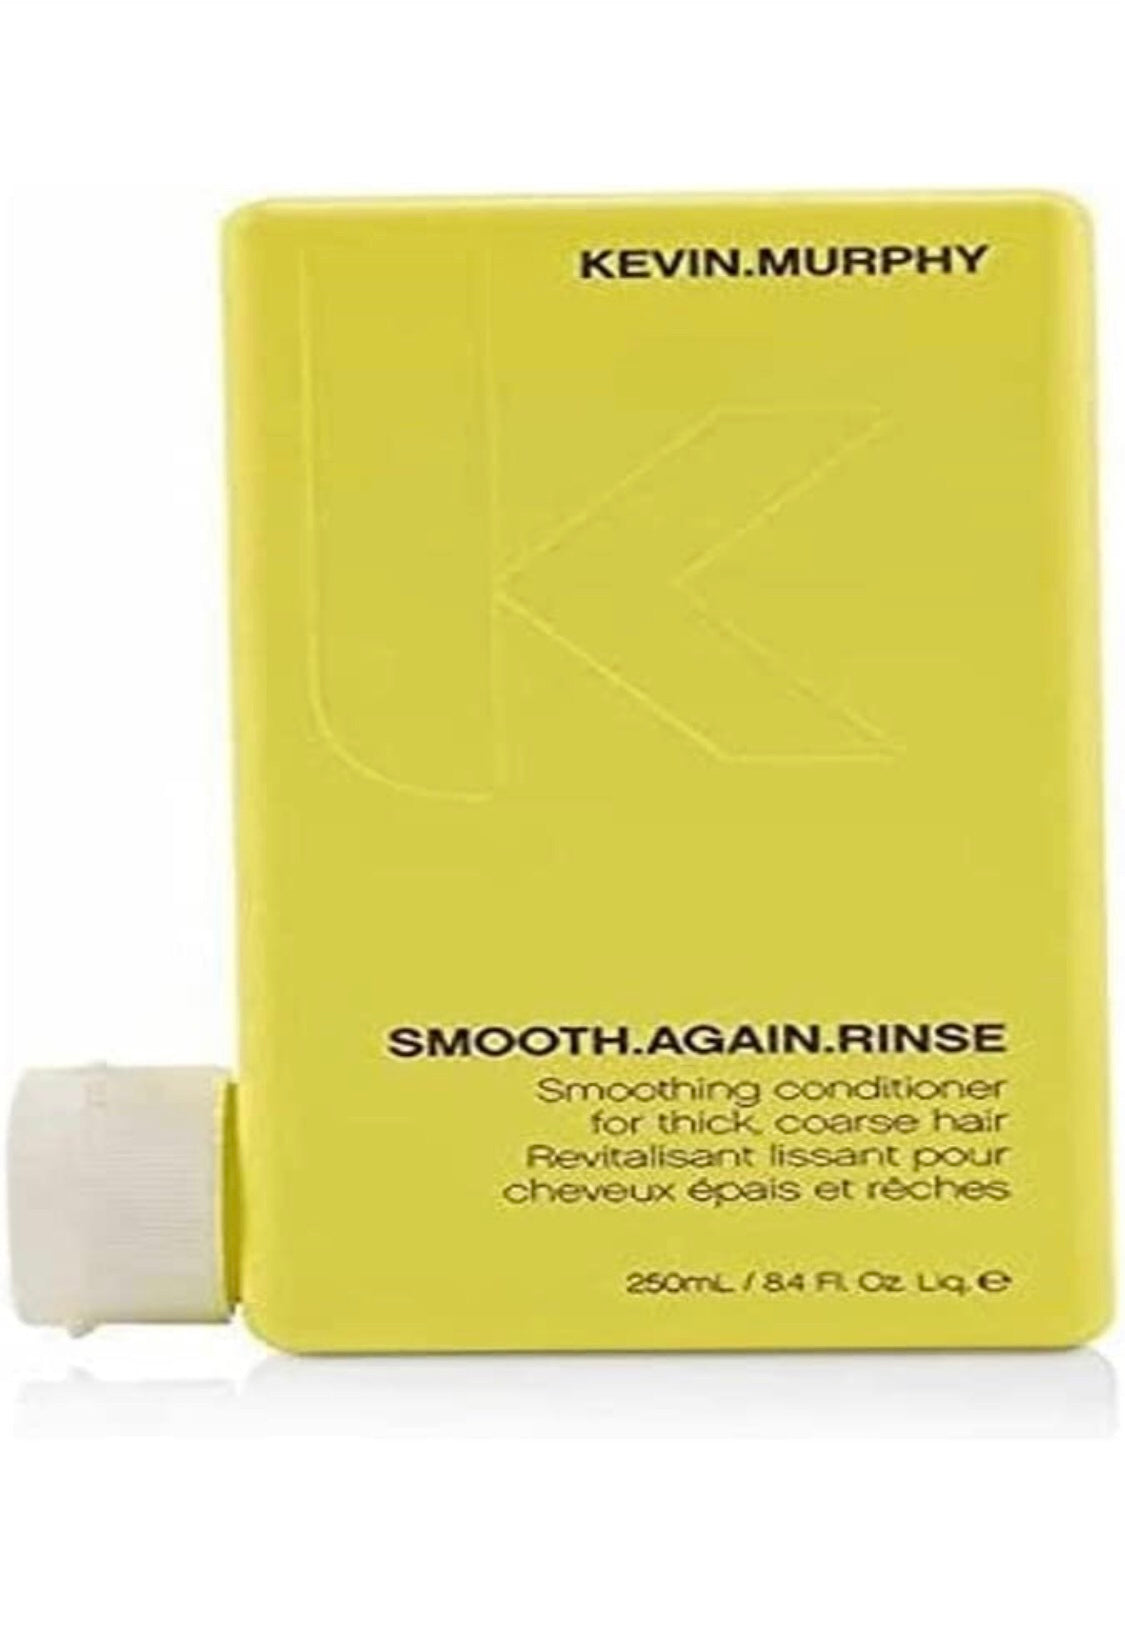 Kevin.Murphy - Smooth.Again.Rinse conditioner 8.4 fl. oz. / 250 ml